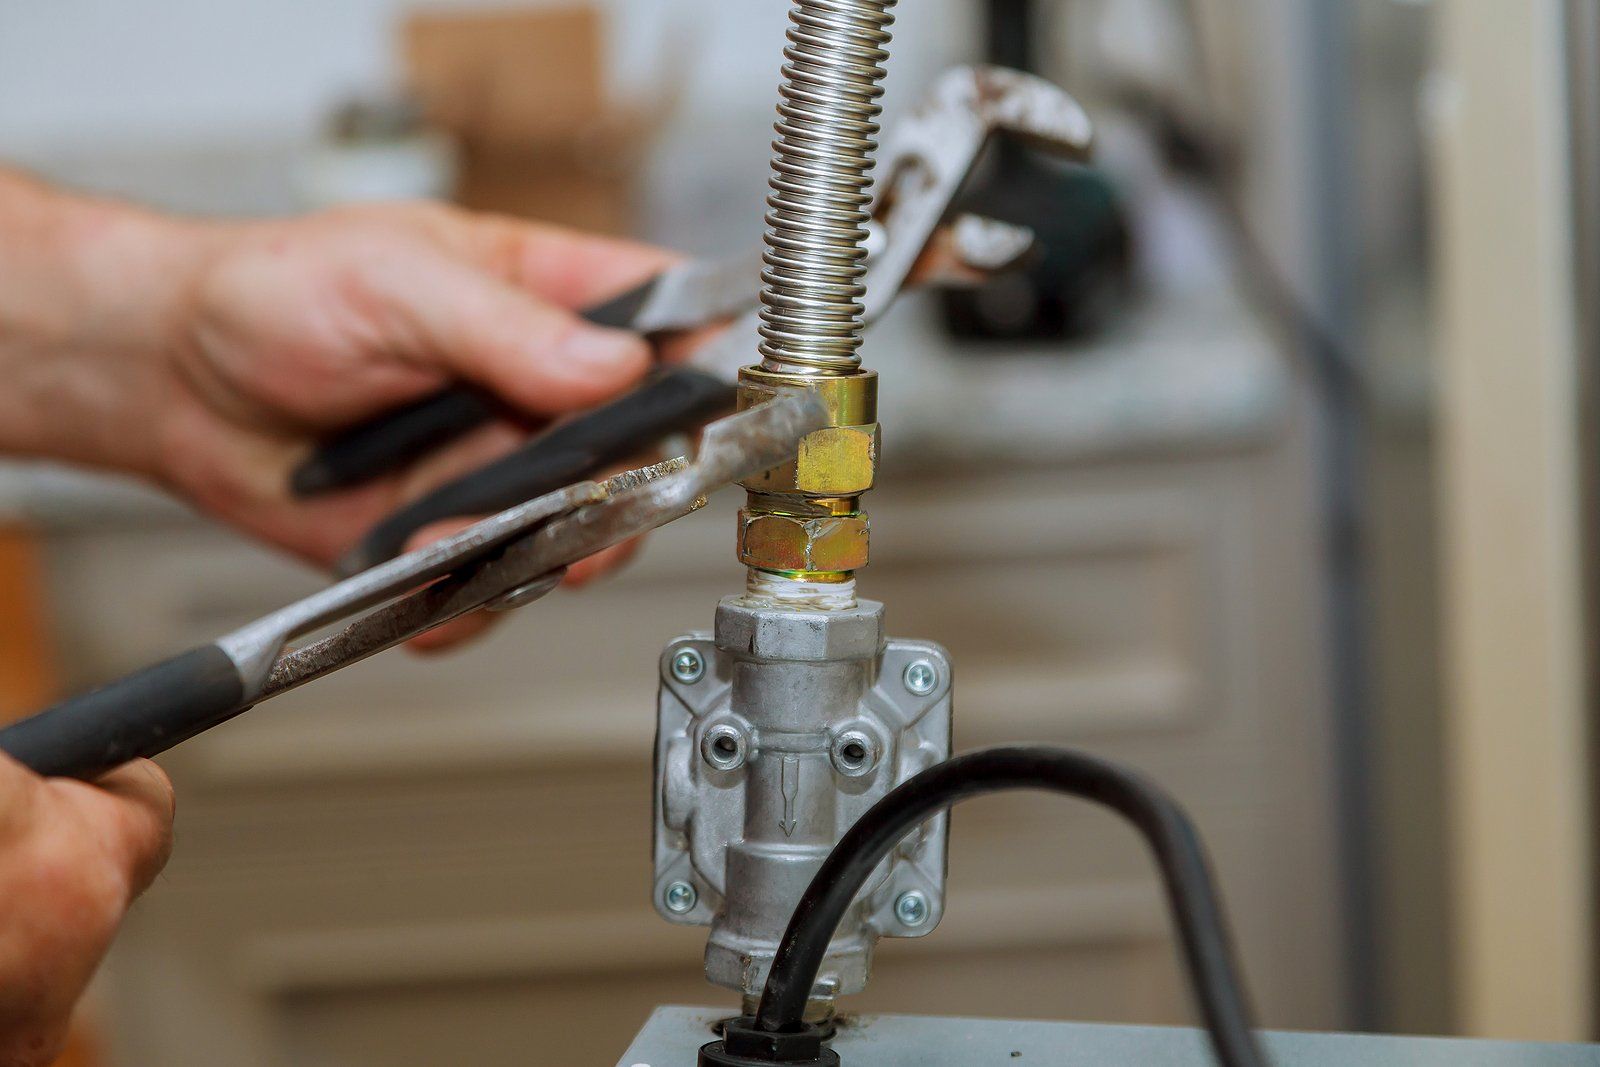 Gas Line Repair Services in New Carlisle, OH